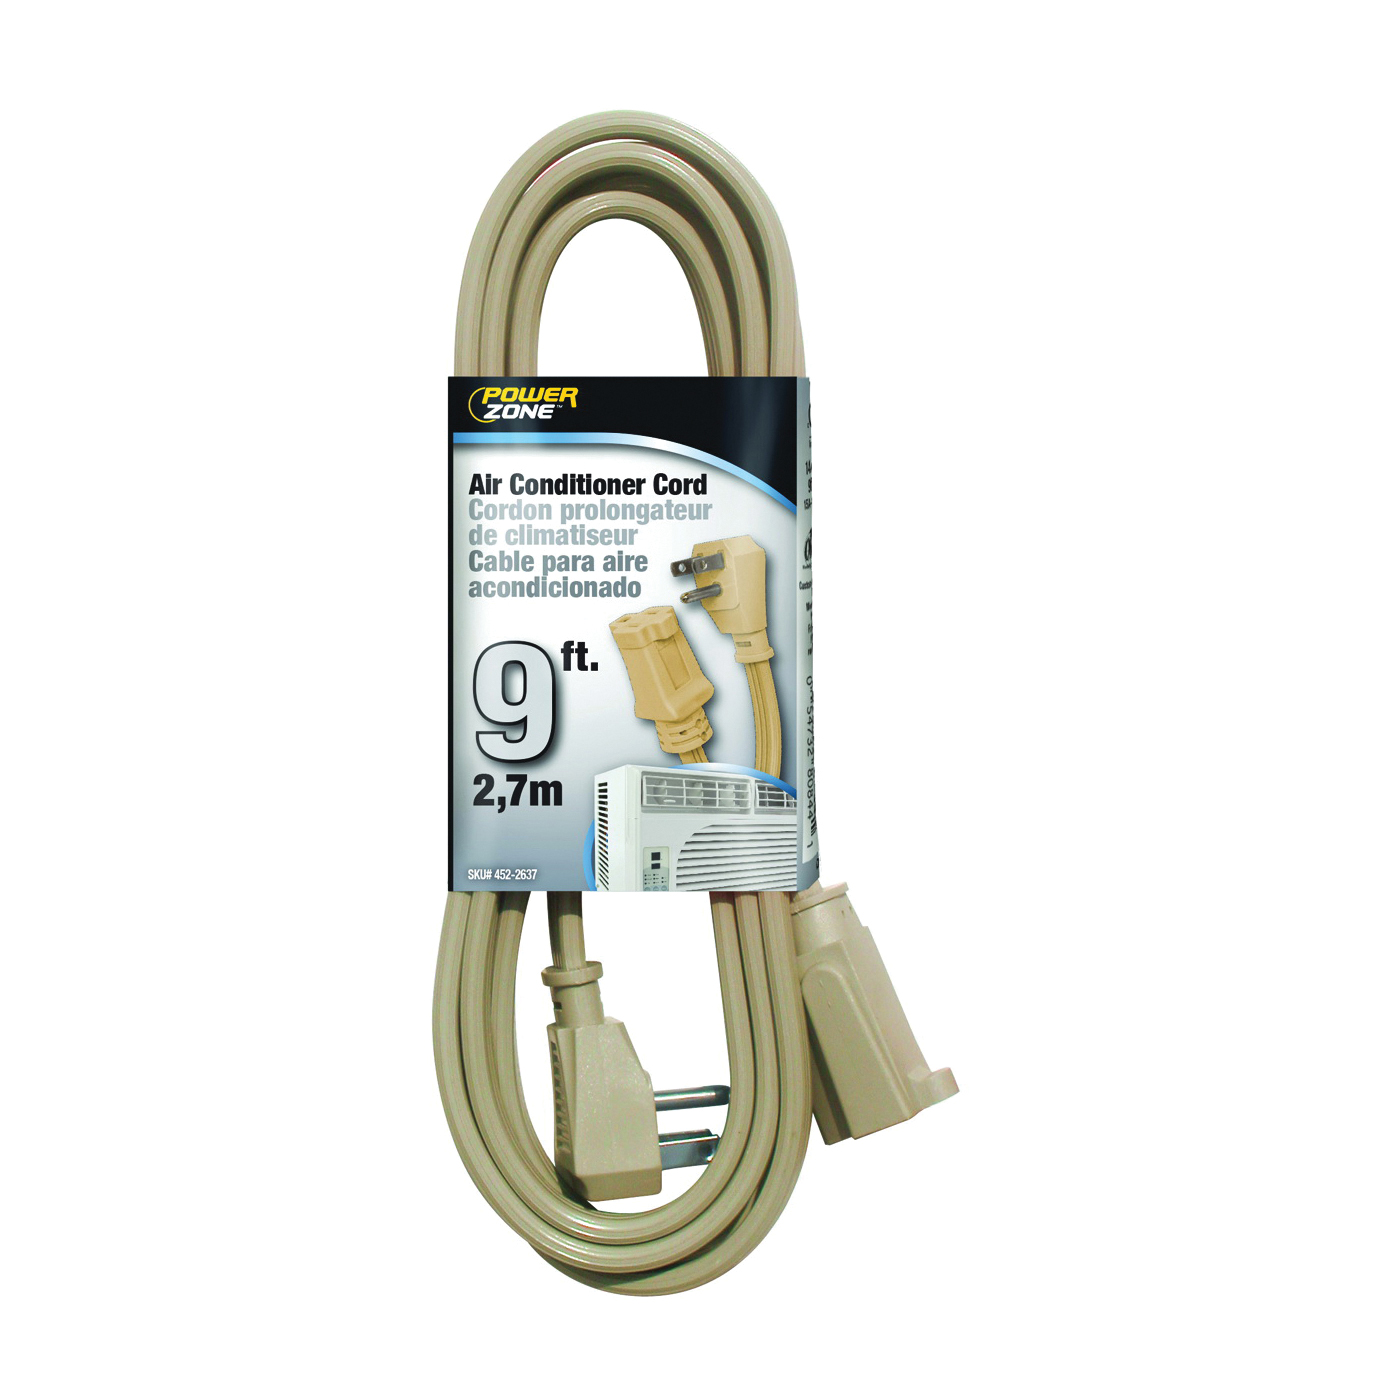 OR681509 Single-Ended Extension Cord, SPT-3, Vinyl, Beige, For: Air conditioner and Appliances